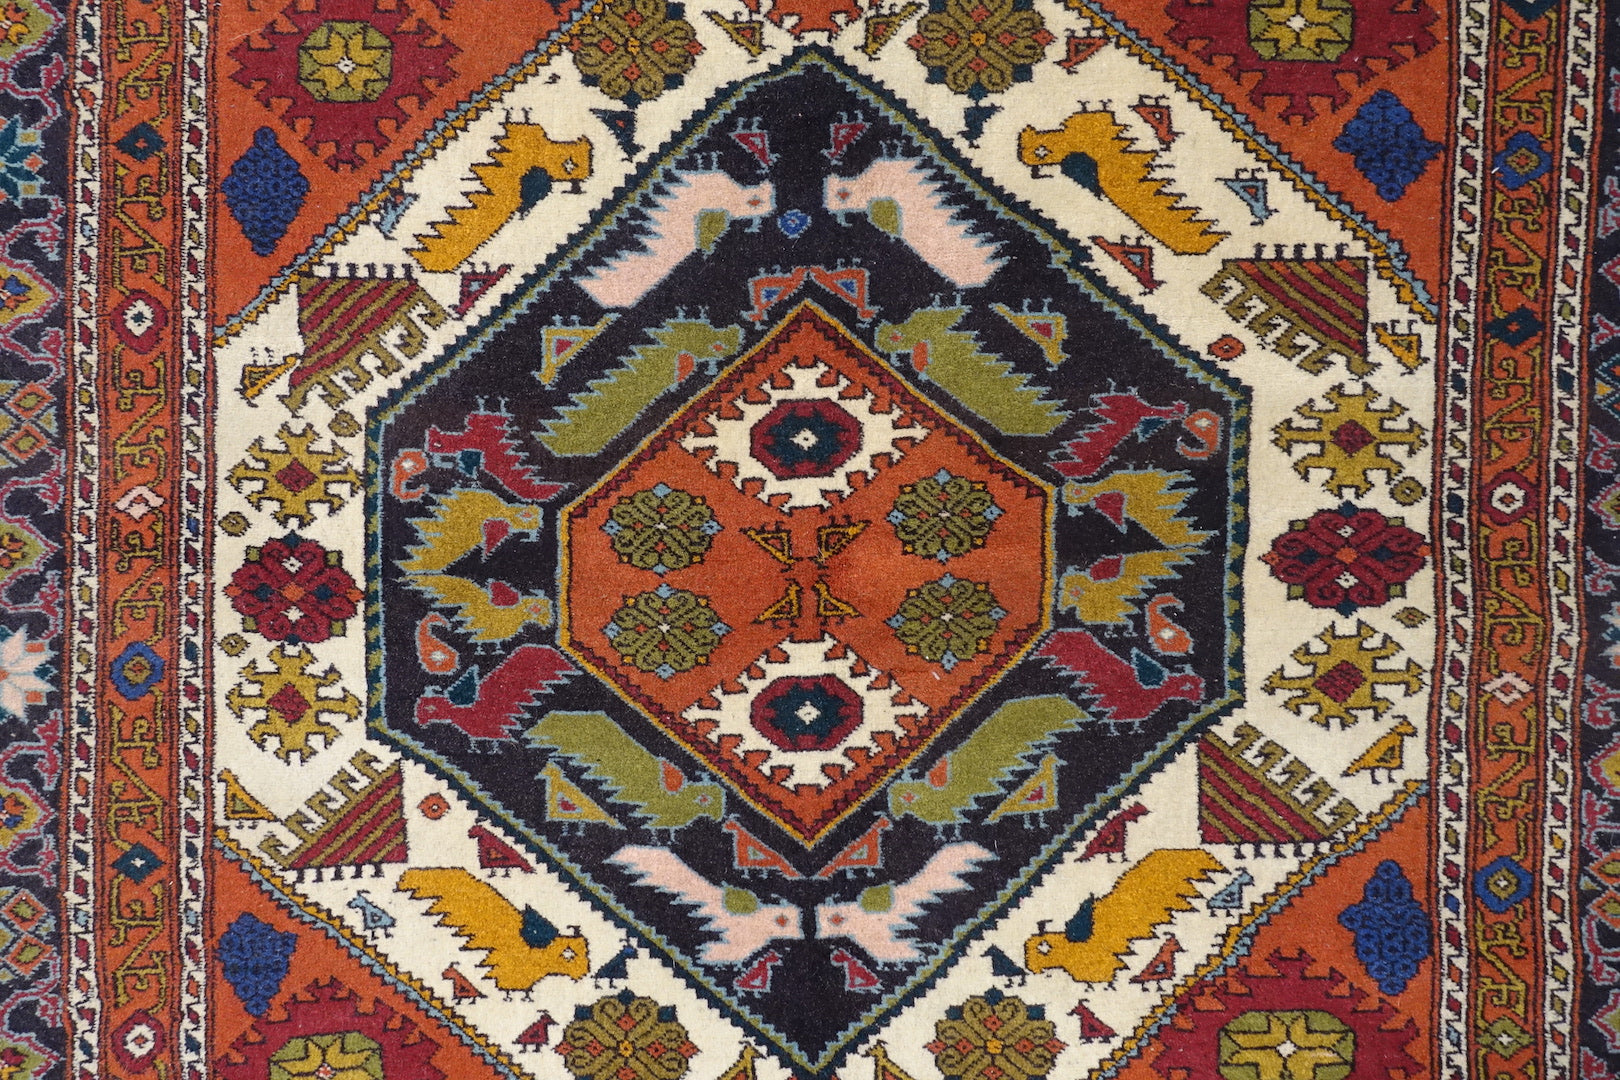 A 4 by 5.5 feet zanjan wool rug. The colours used are orange,brown,blue,red and beige.